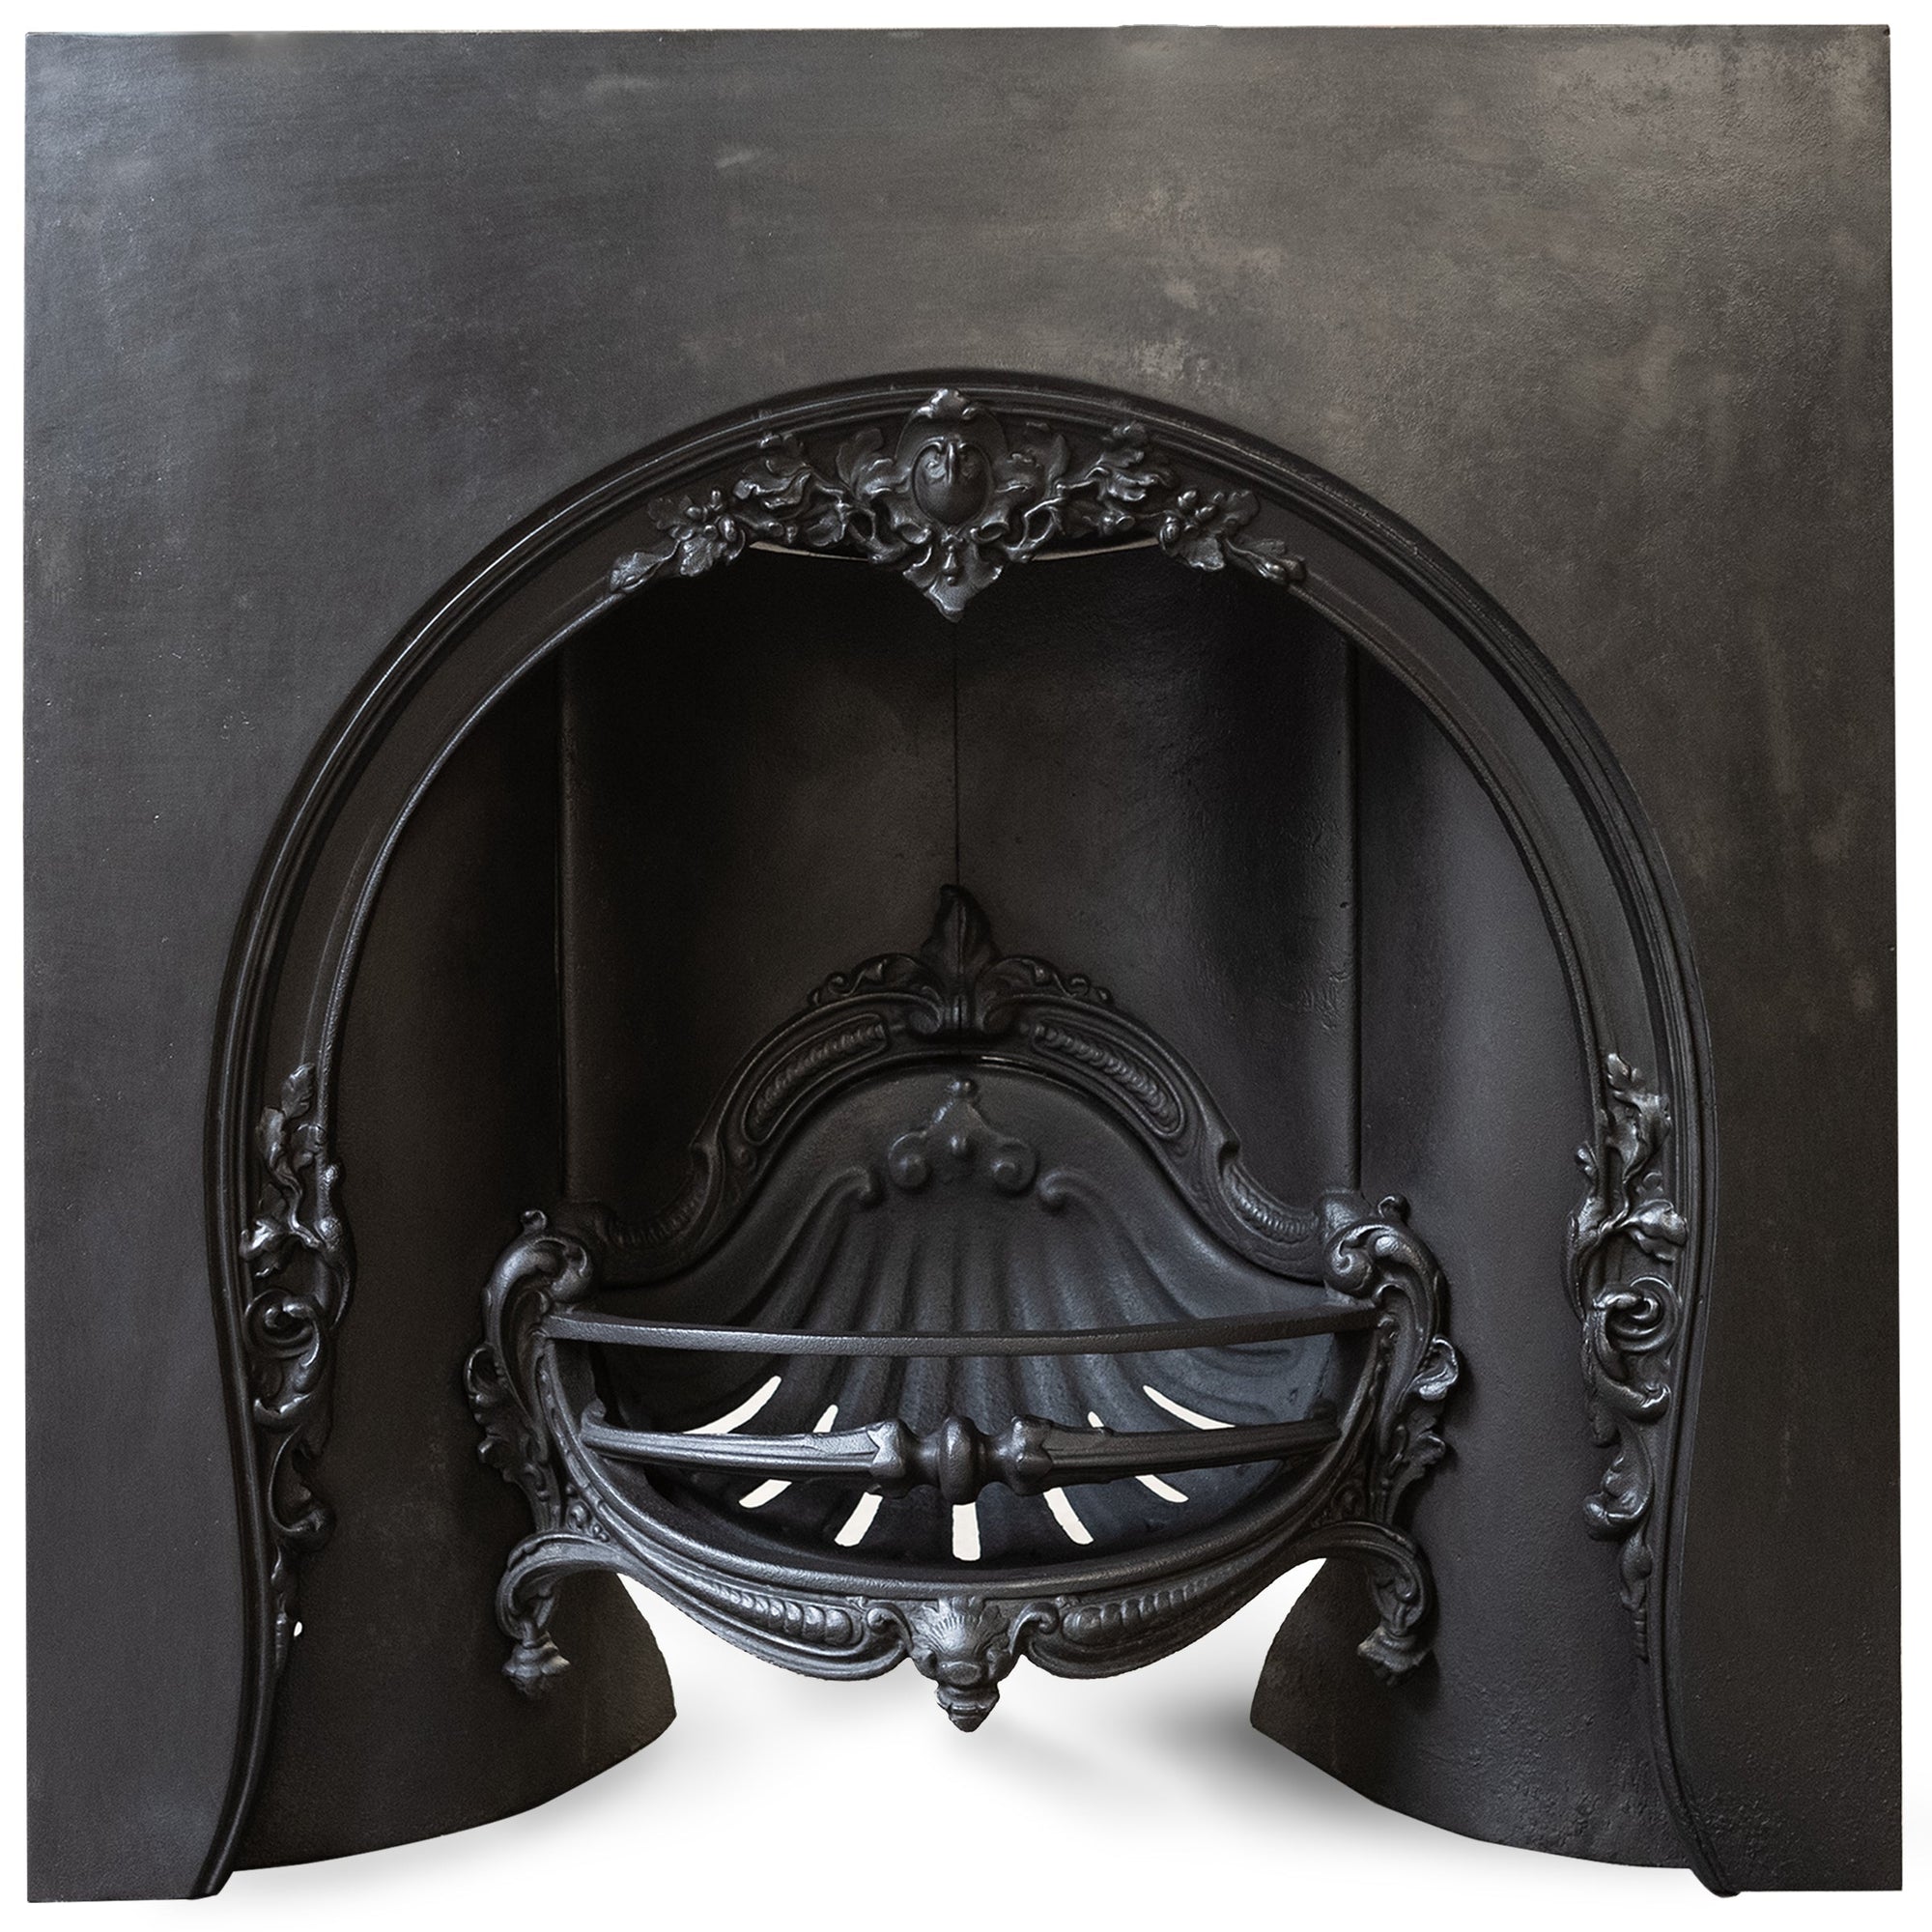 Grand Ornate Victorian Style Cast Iron Insert | The Architectural Forum